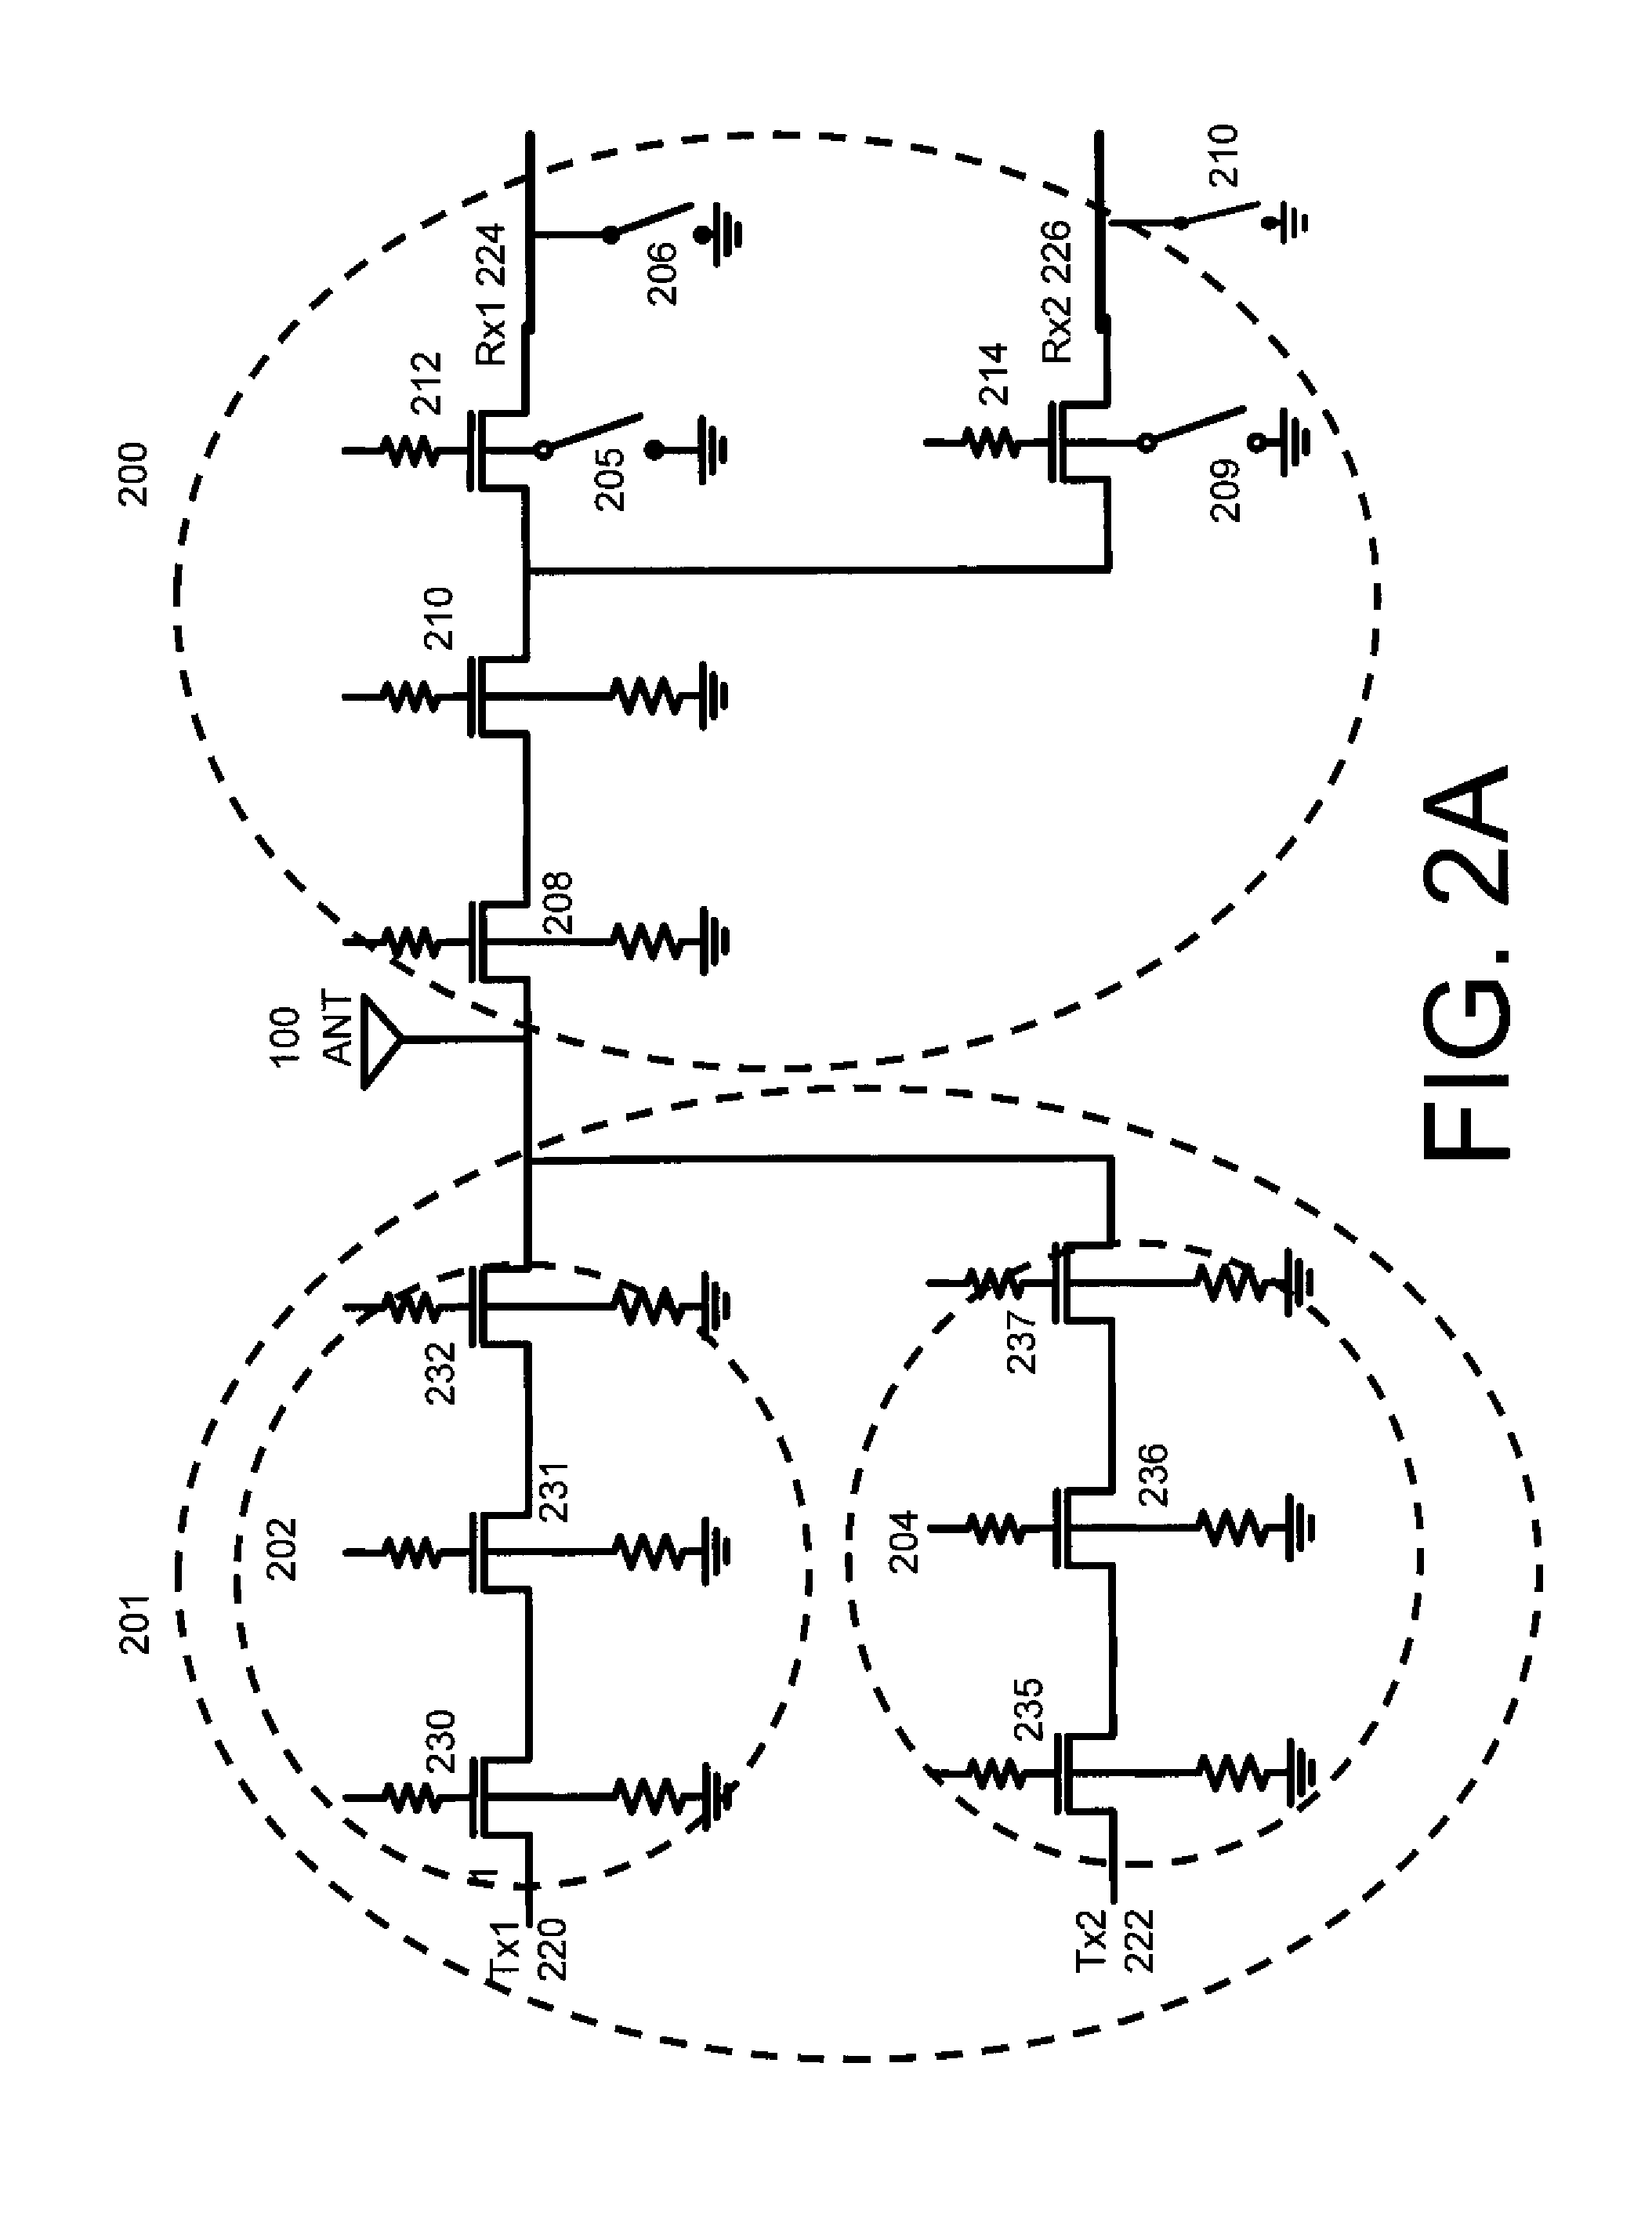 Systems, methods, and apparatuses for complementary metal oxide semiconductor (CMOS) antenna switches using body switching in multistacking structure